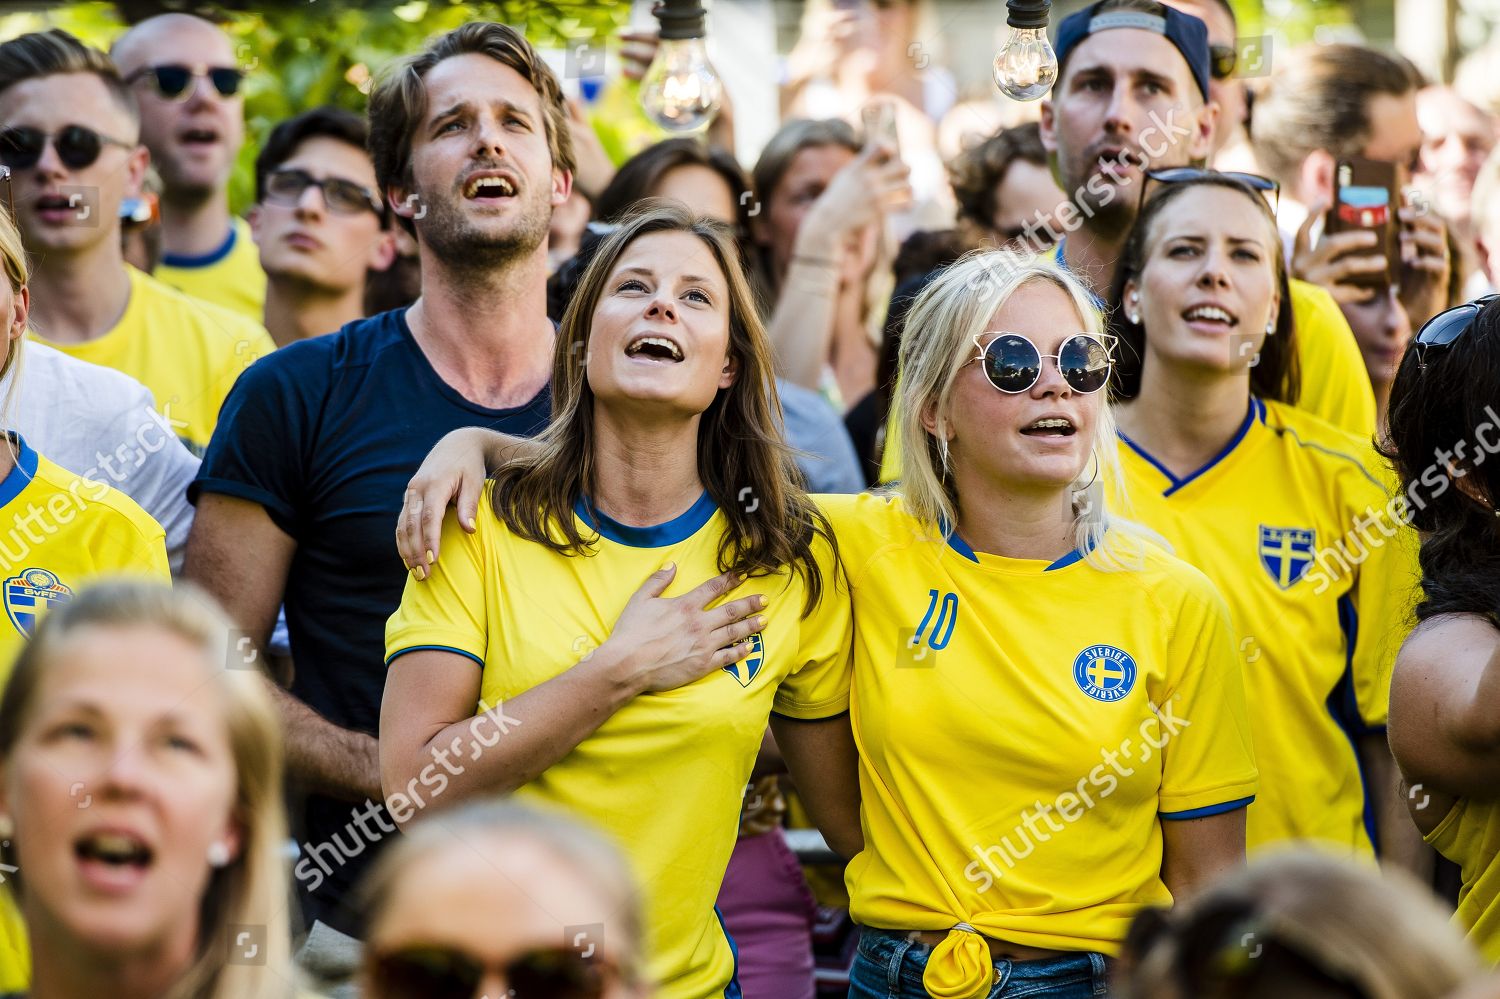 Fans Watching Game Celebrating Norra Editorial Stock Photo - Image | Shutterstock